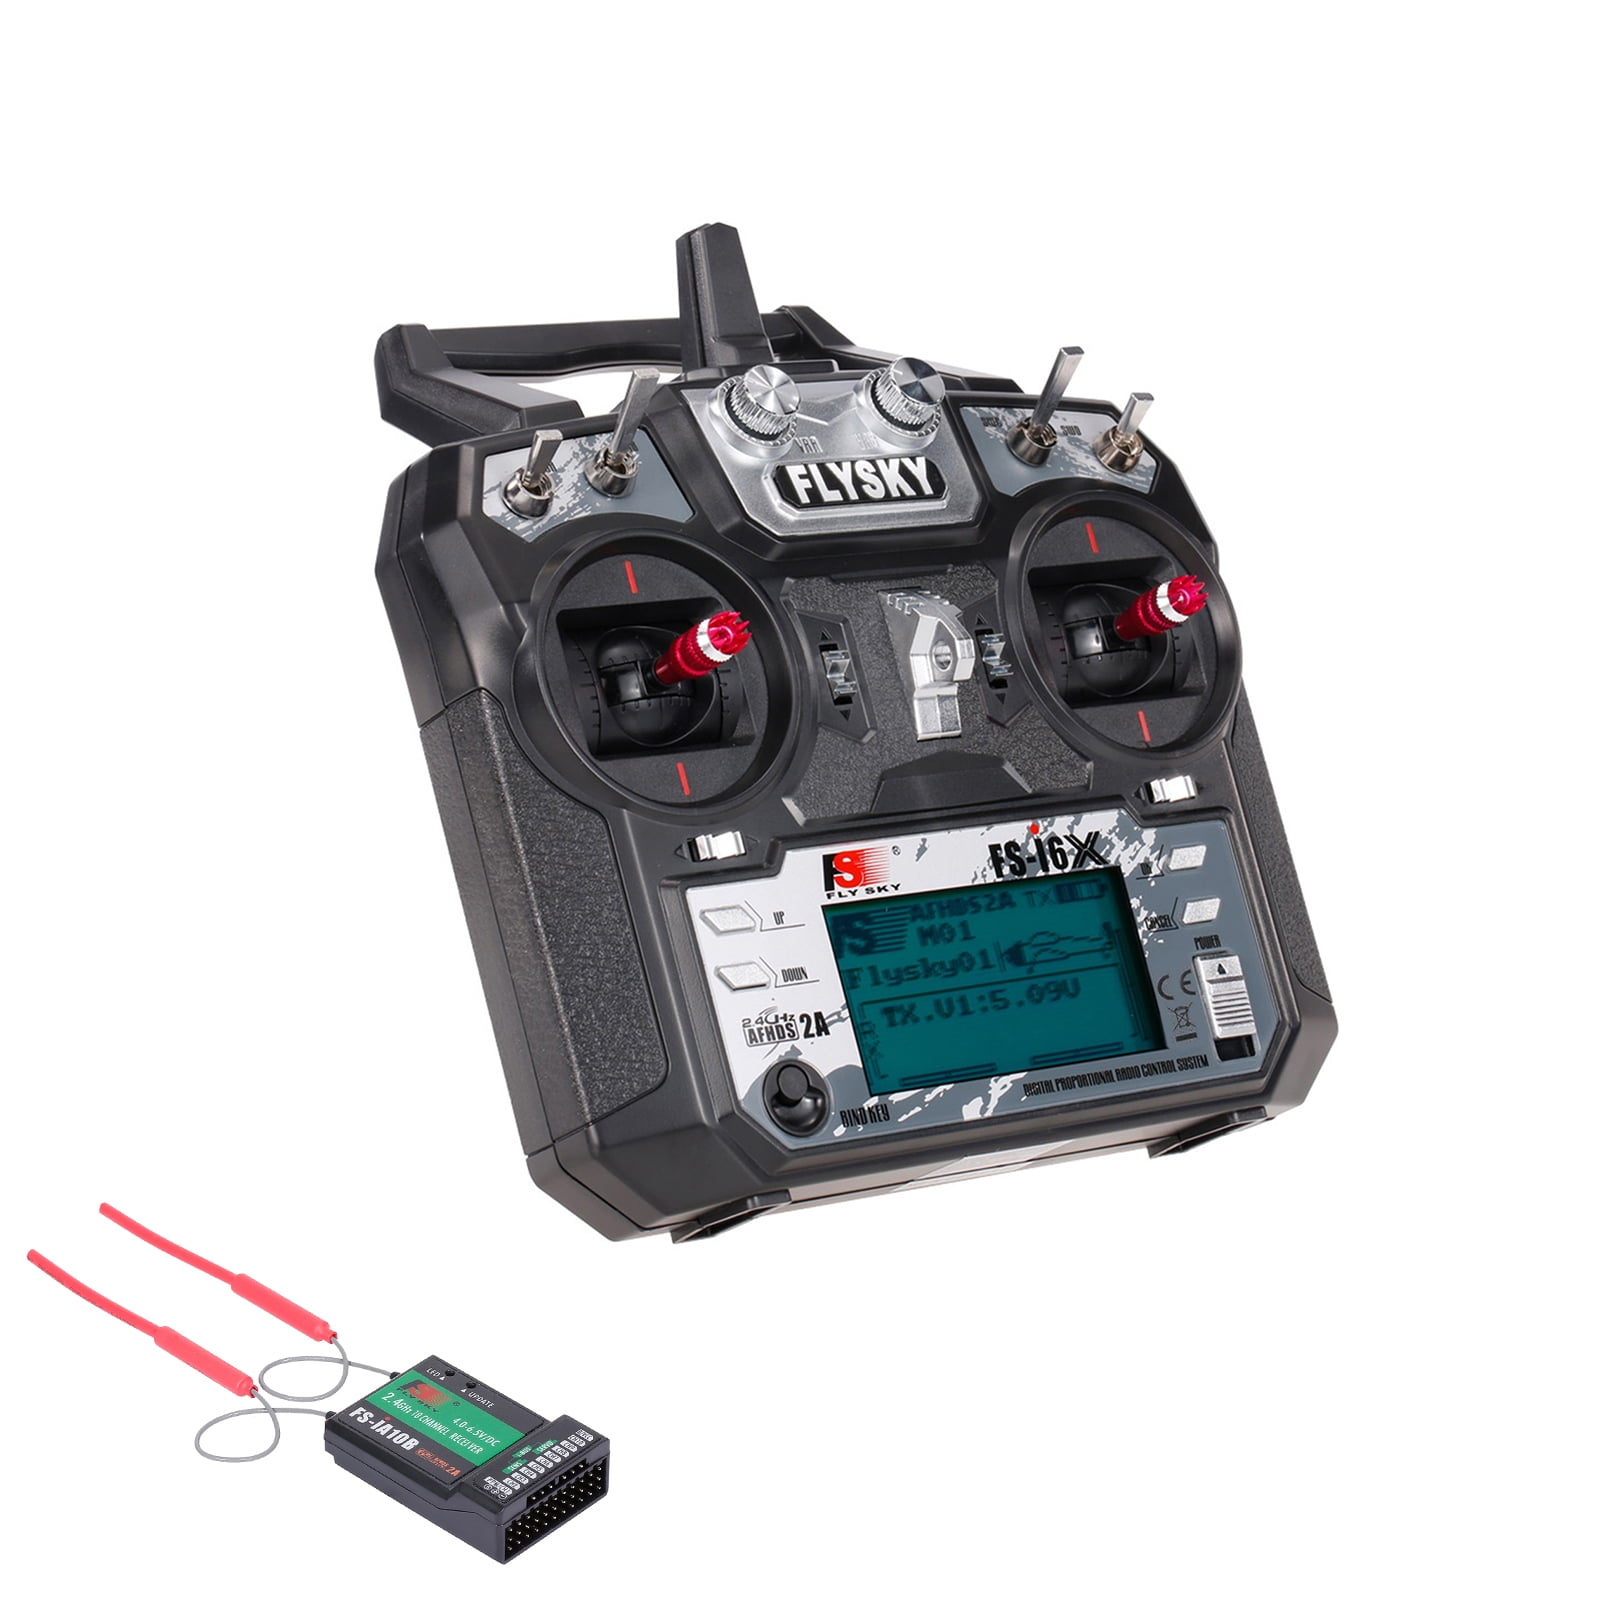 Flysky FS-i6X I6X 2.4GHz 10CH AFHDS 2A RC Transmitter Receiver For RC Airplane